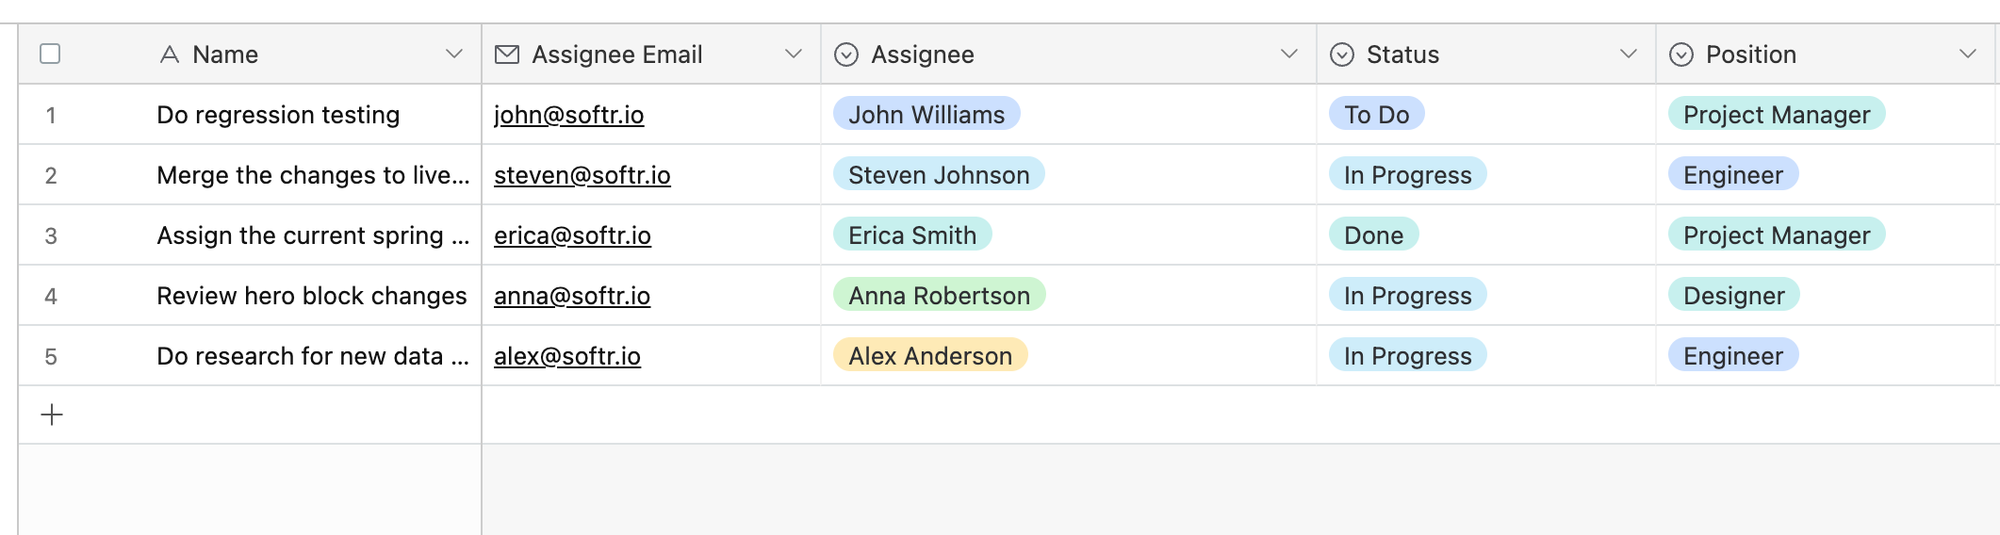 Airtable table with the list of tasks and assignees.